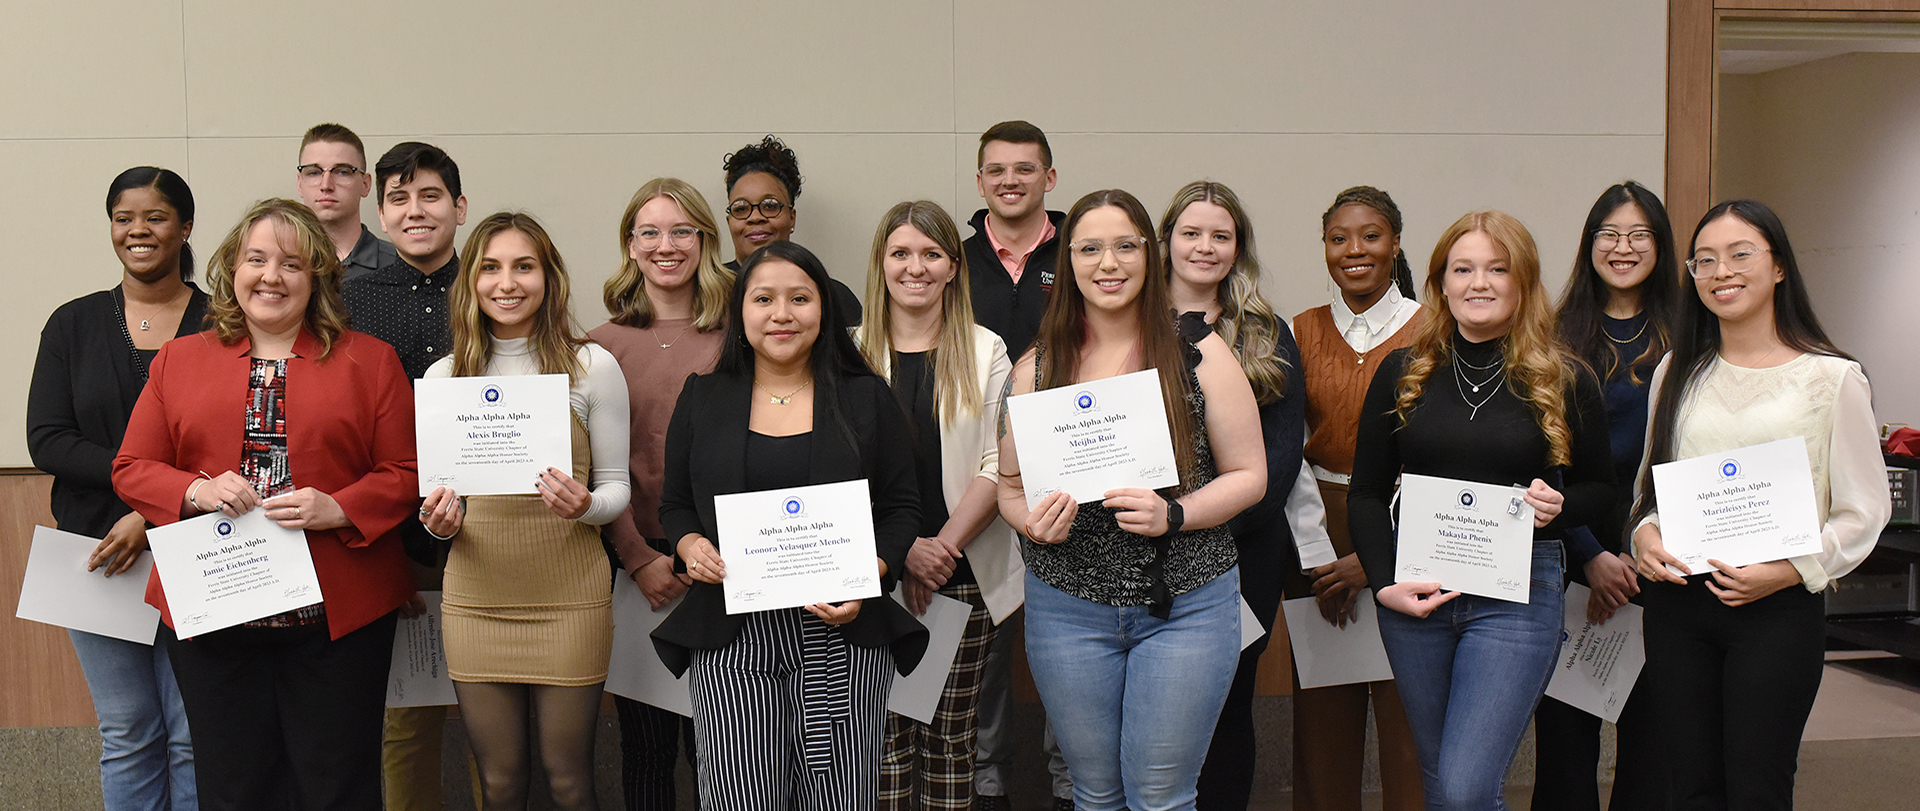 Inaugural Tri-Alpha Induction Ceremony Establishes Recognition for First-Generation Student Success